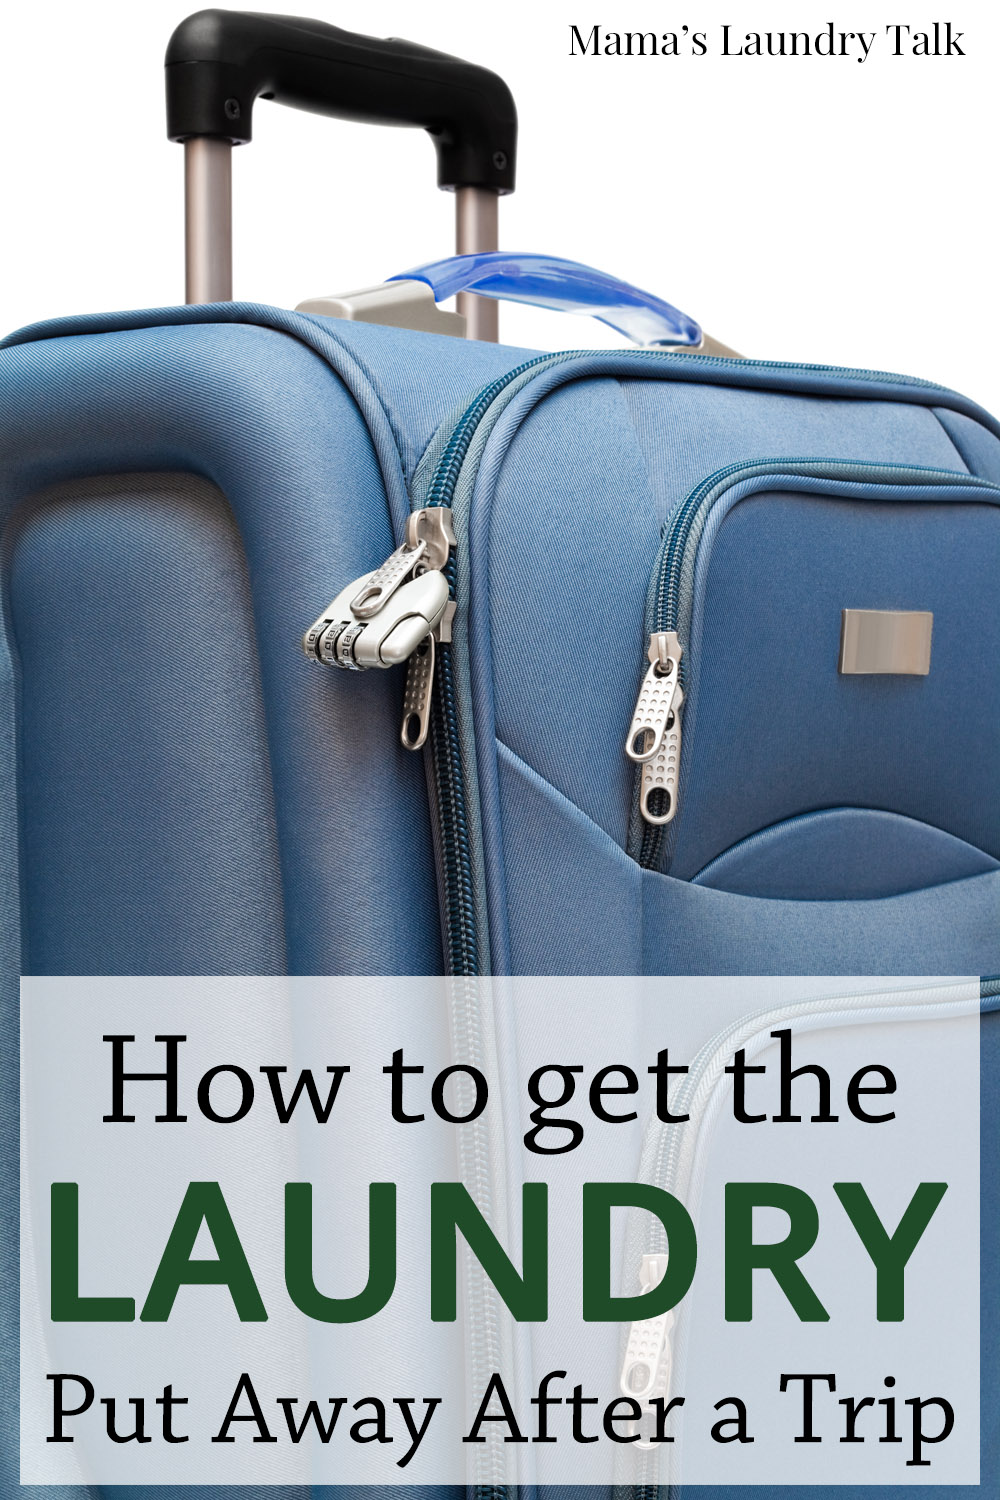 How to Get Laundry Washed After a Trip